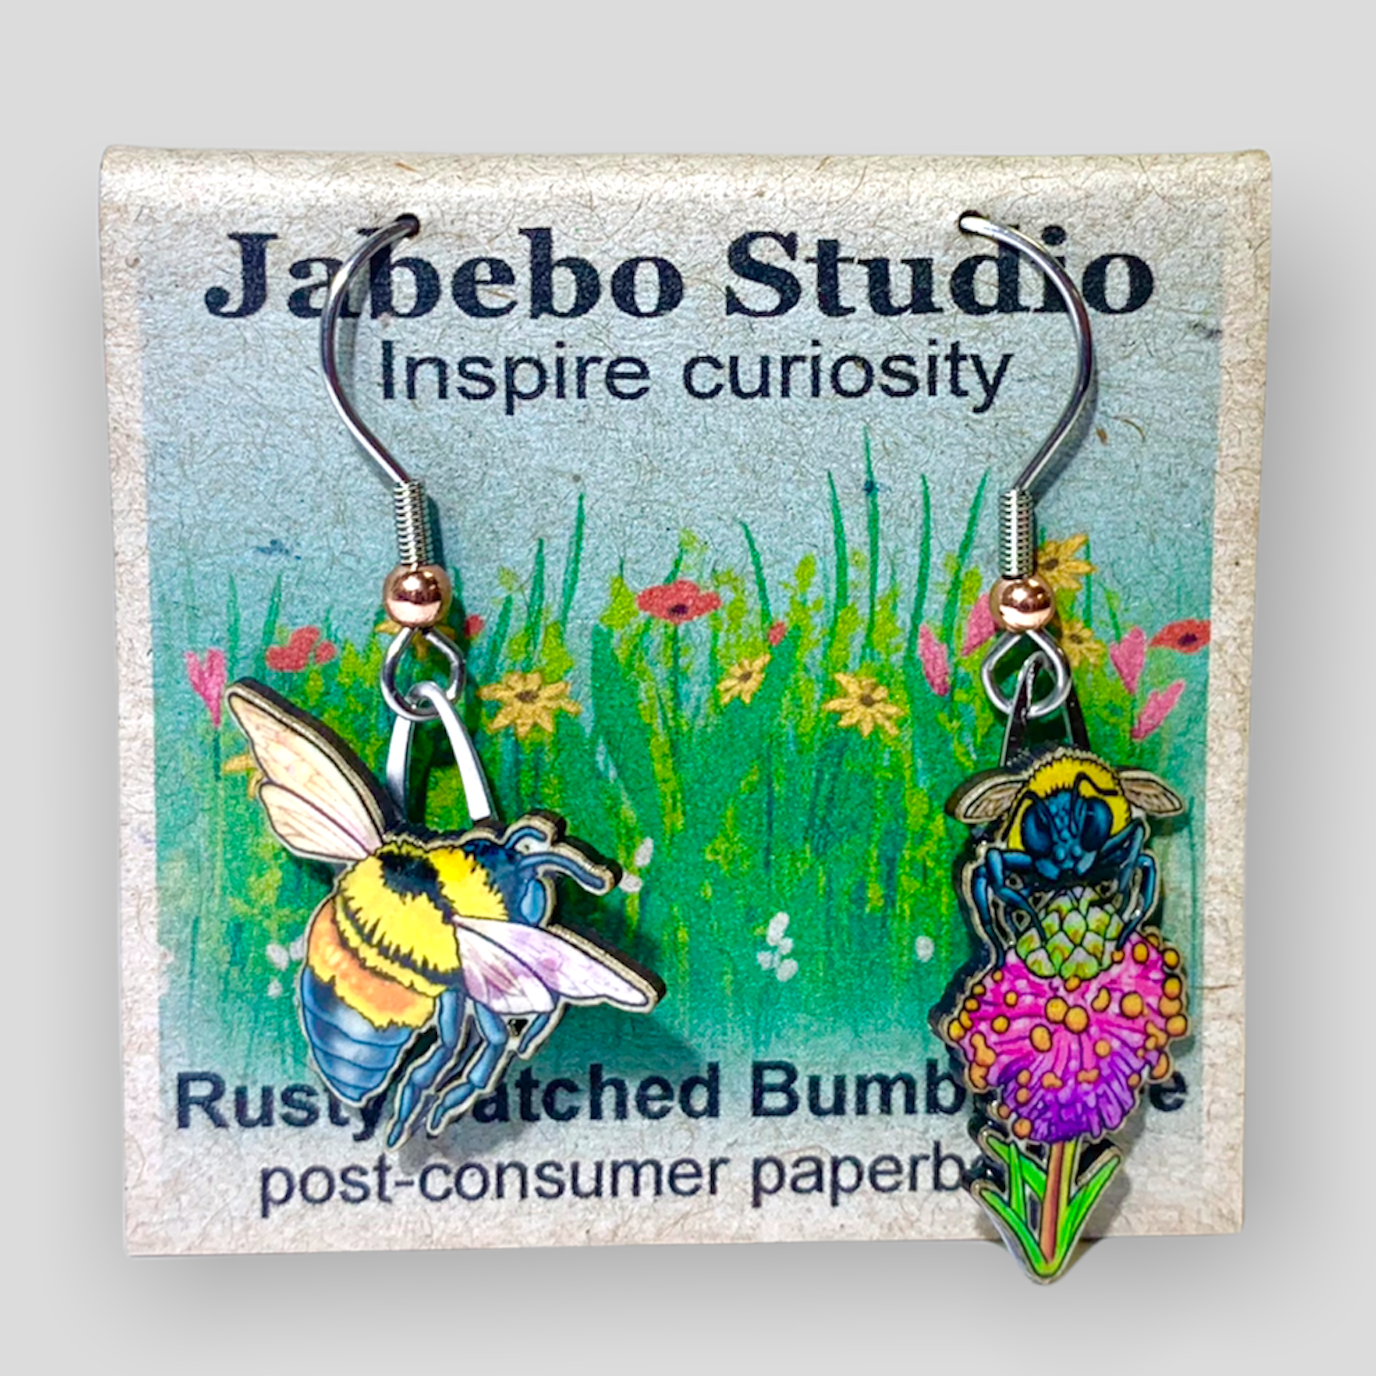 Picture shown is of 1 inch tall pair of earrings of the bug the Rusty-Patched Bumble Bee.